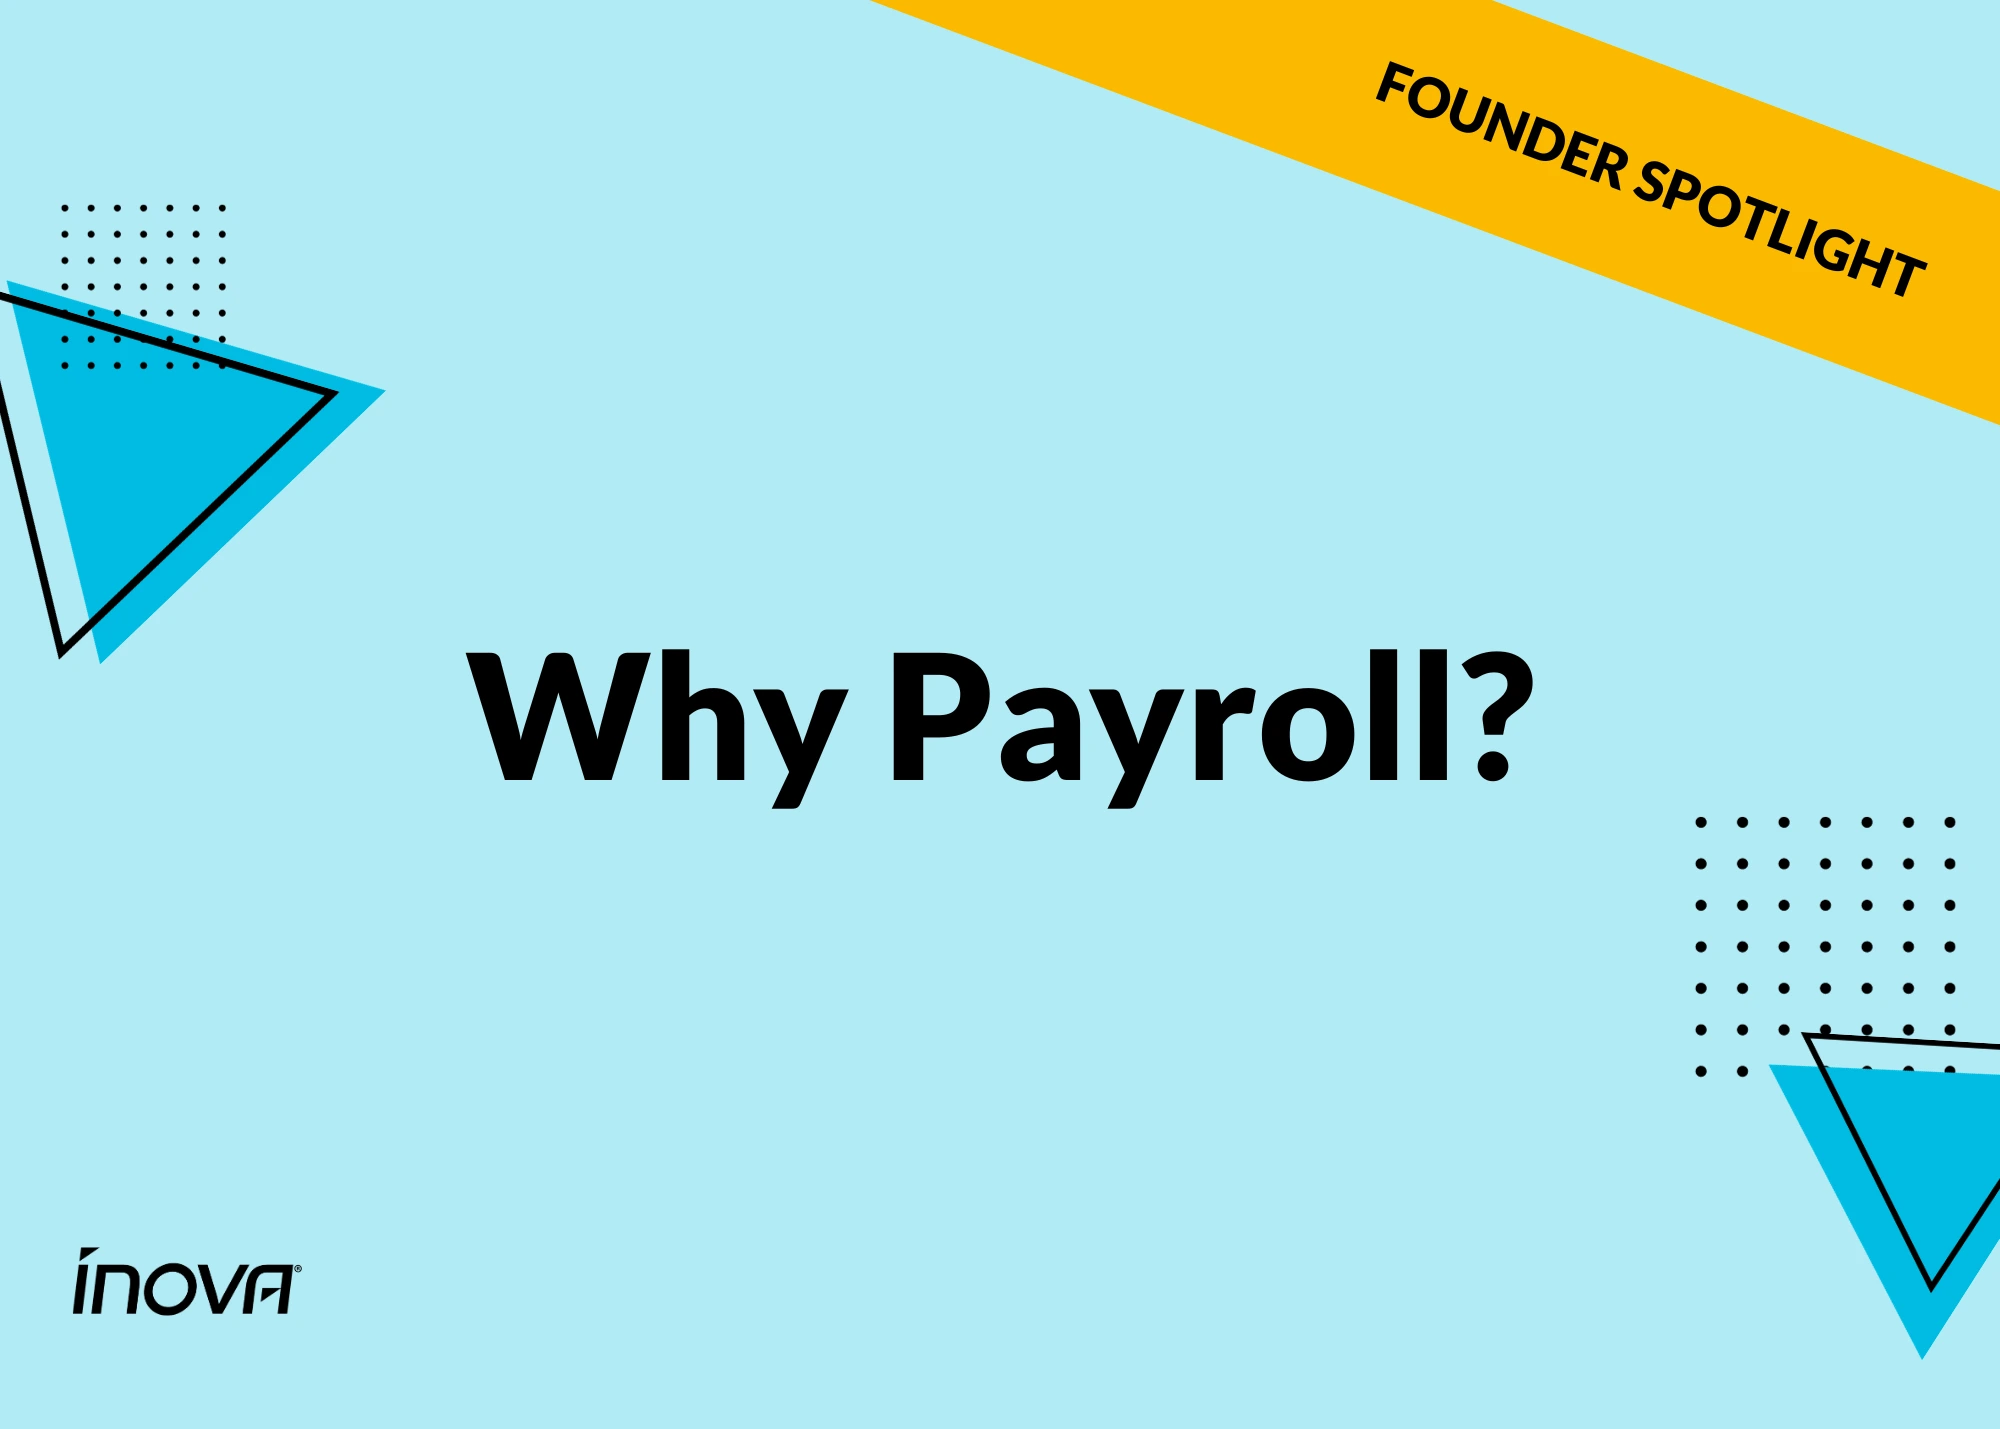 Founder Spotlight - Why Payroll? graphic